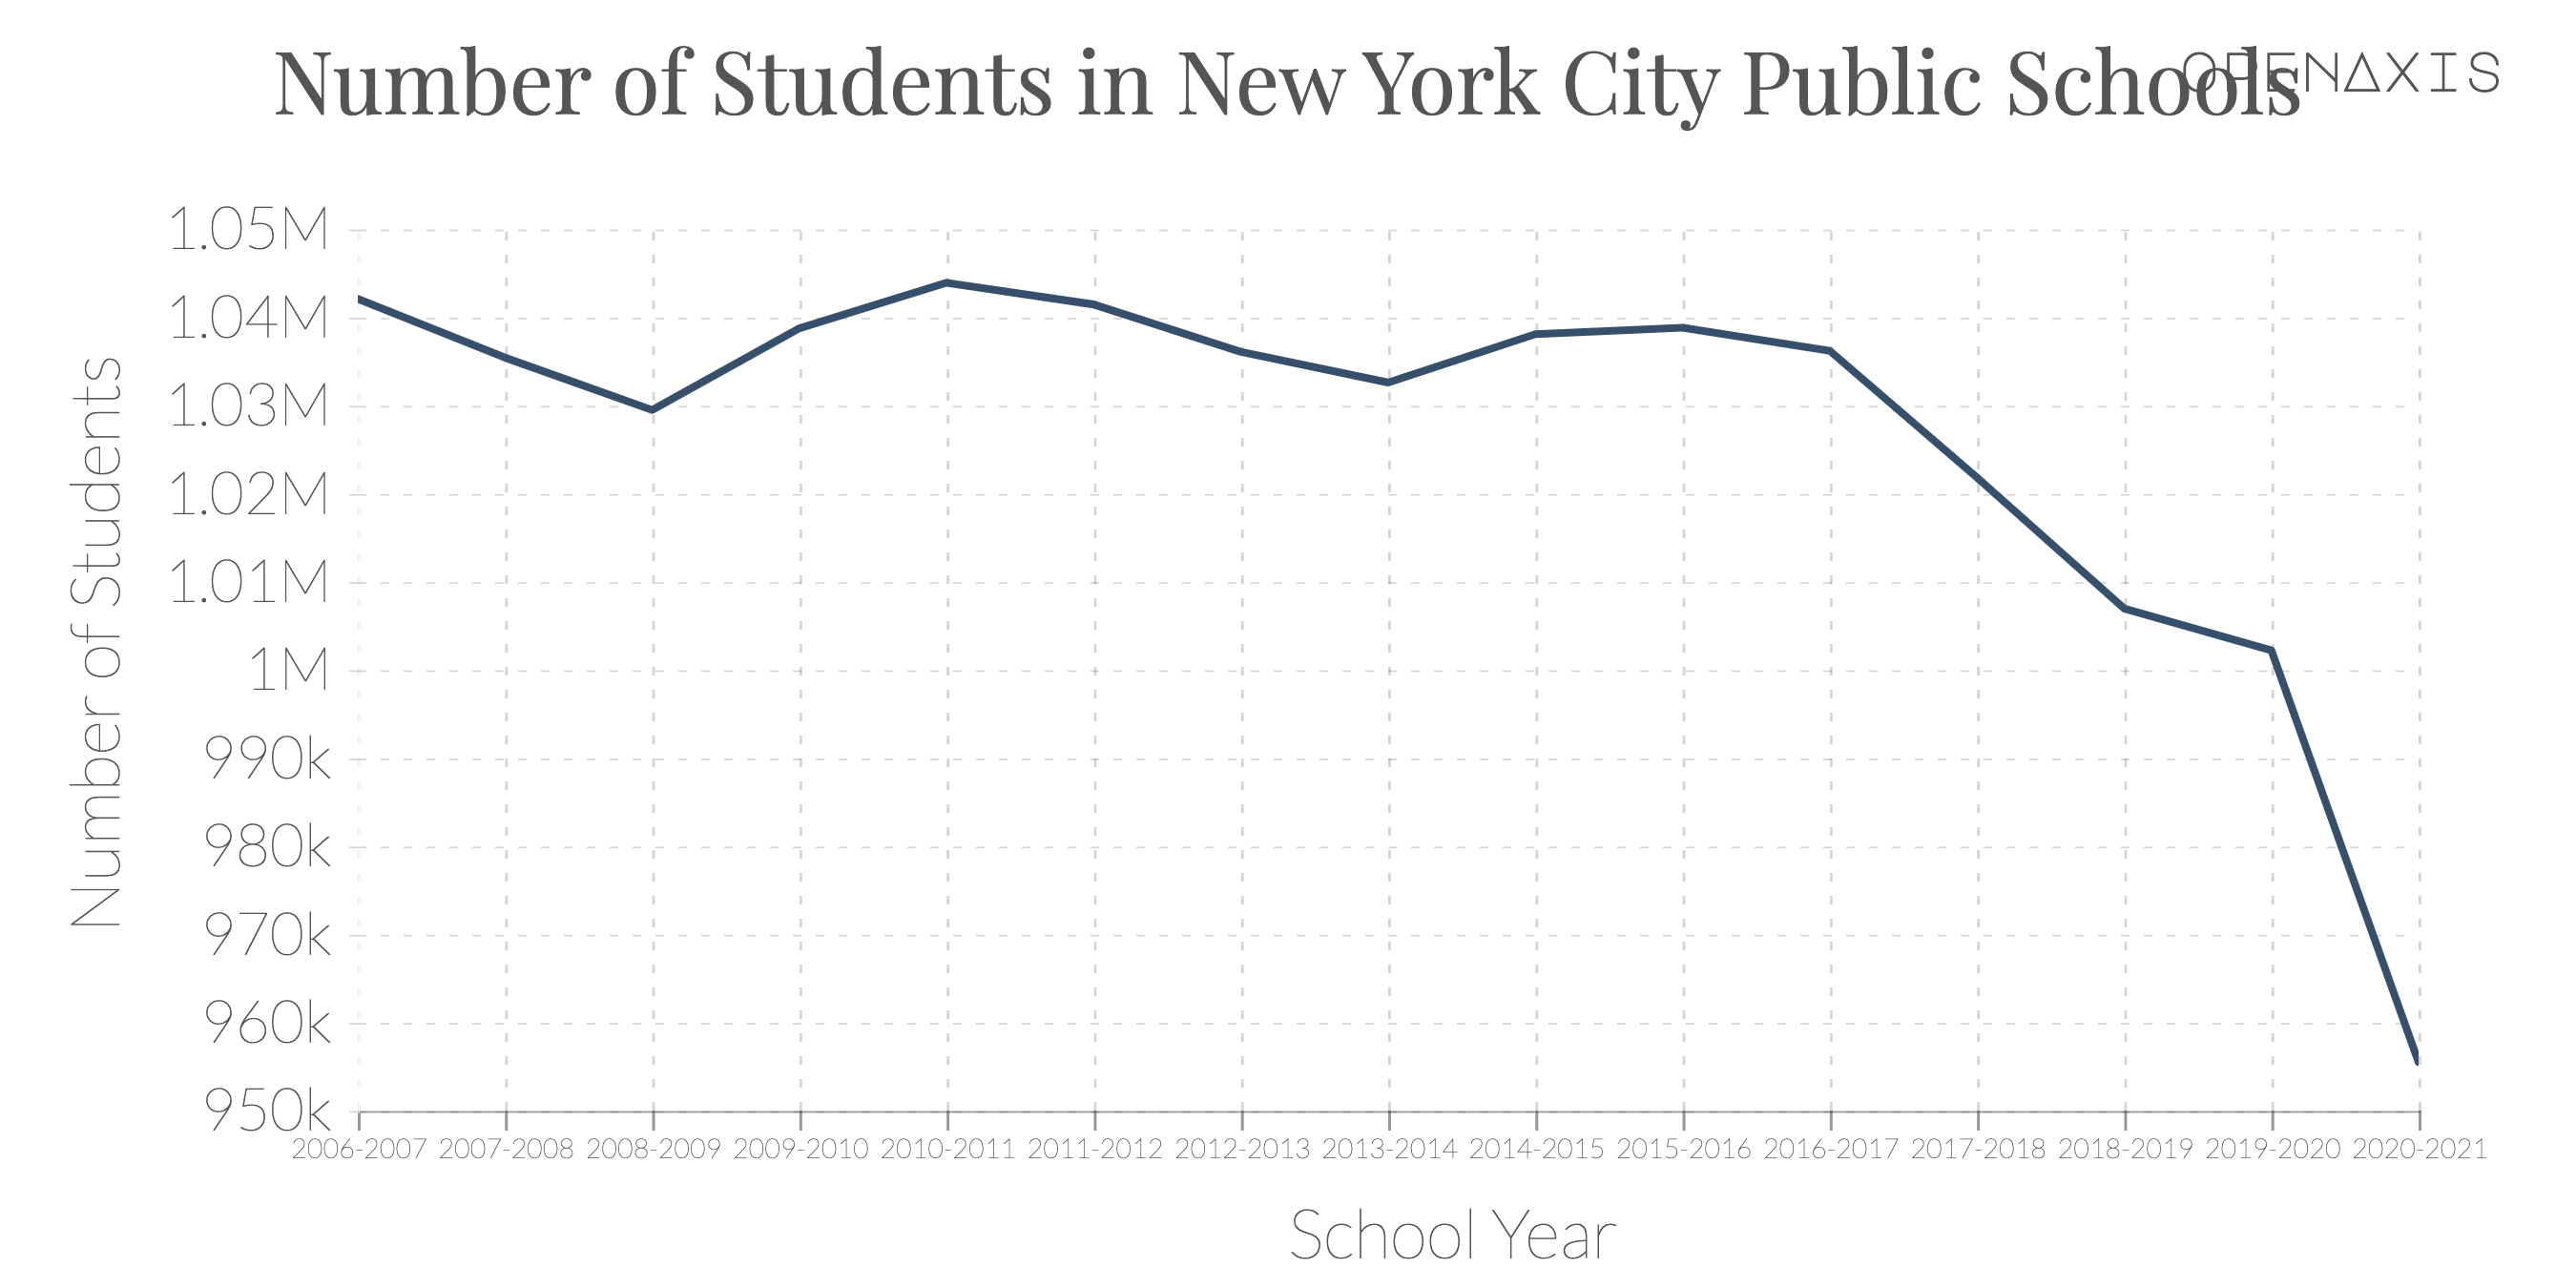 "Number of Students in New York City Public Schools"